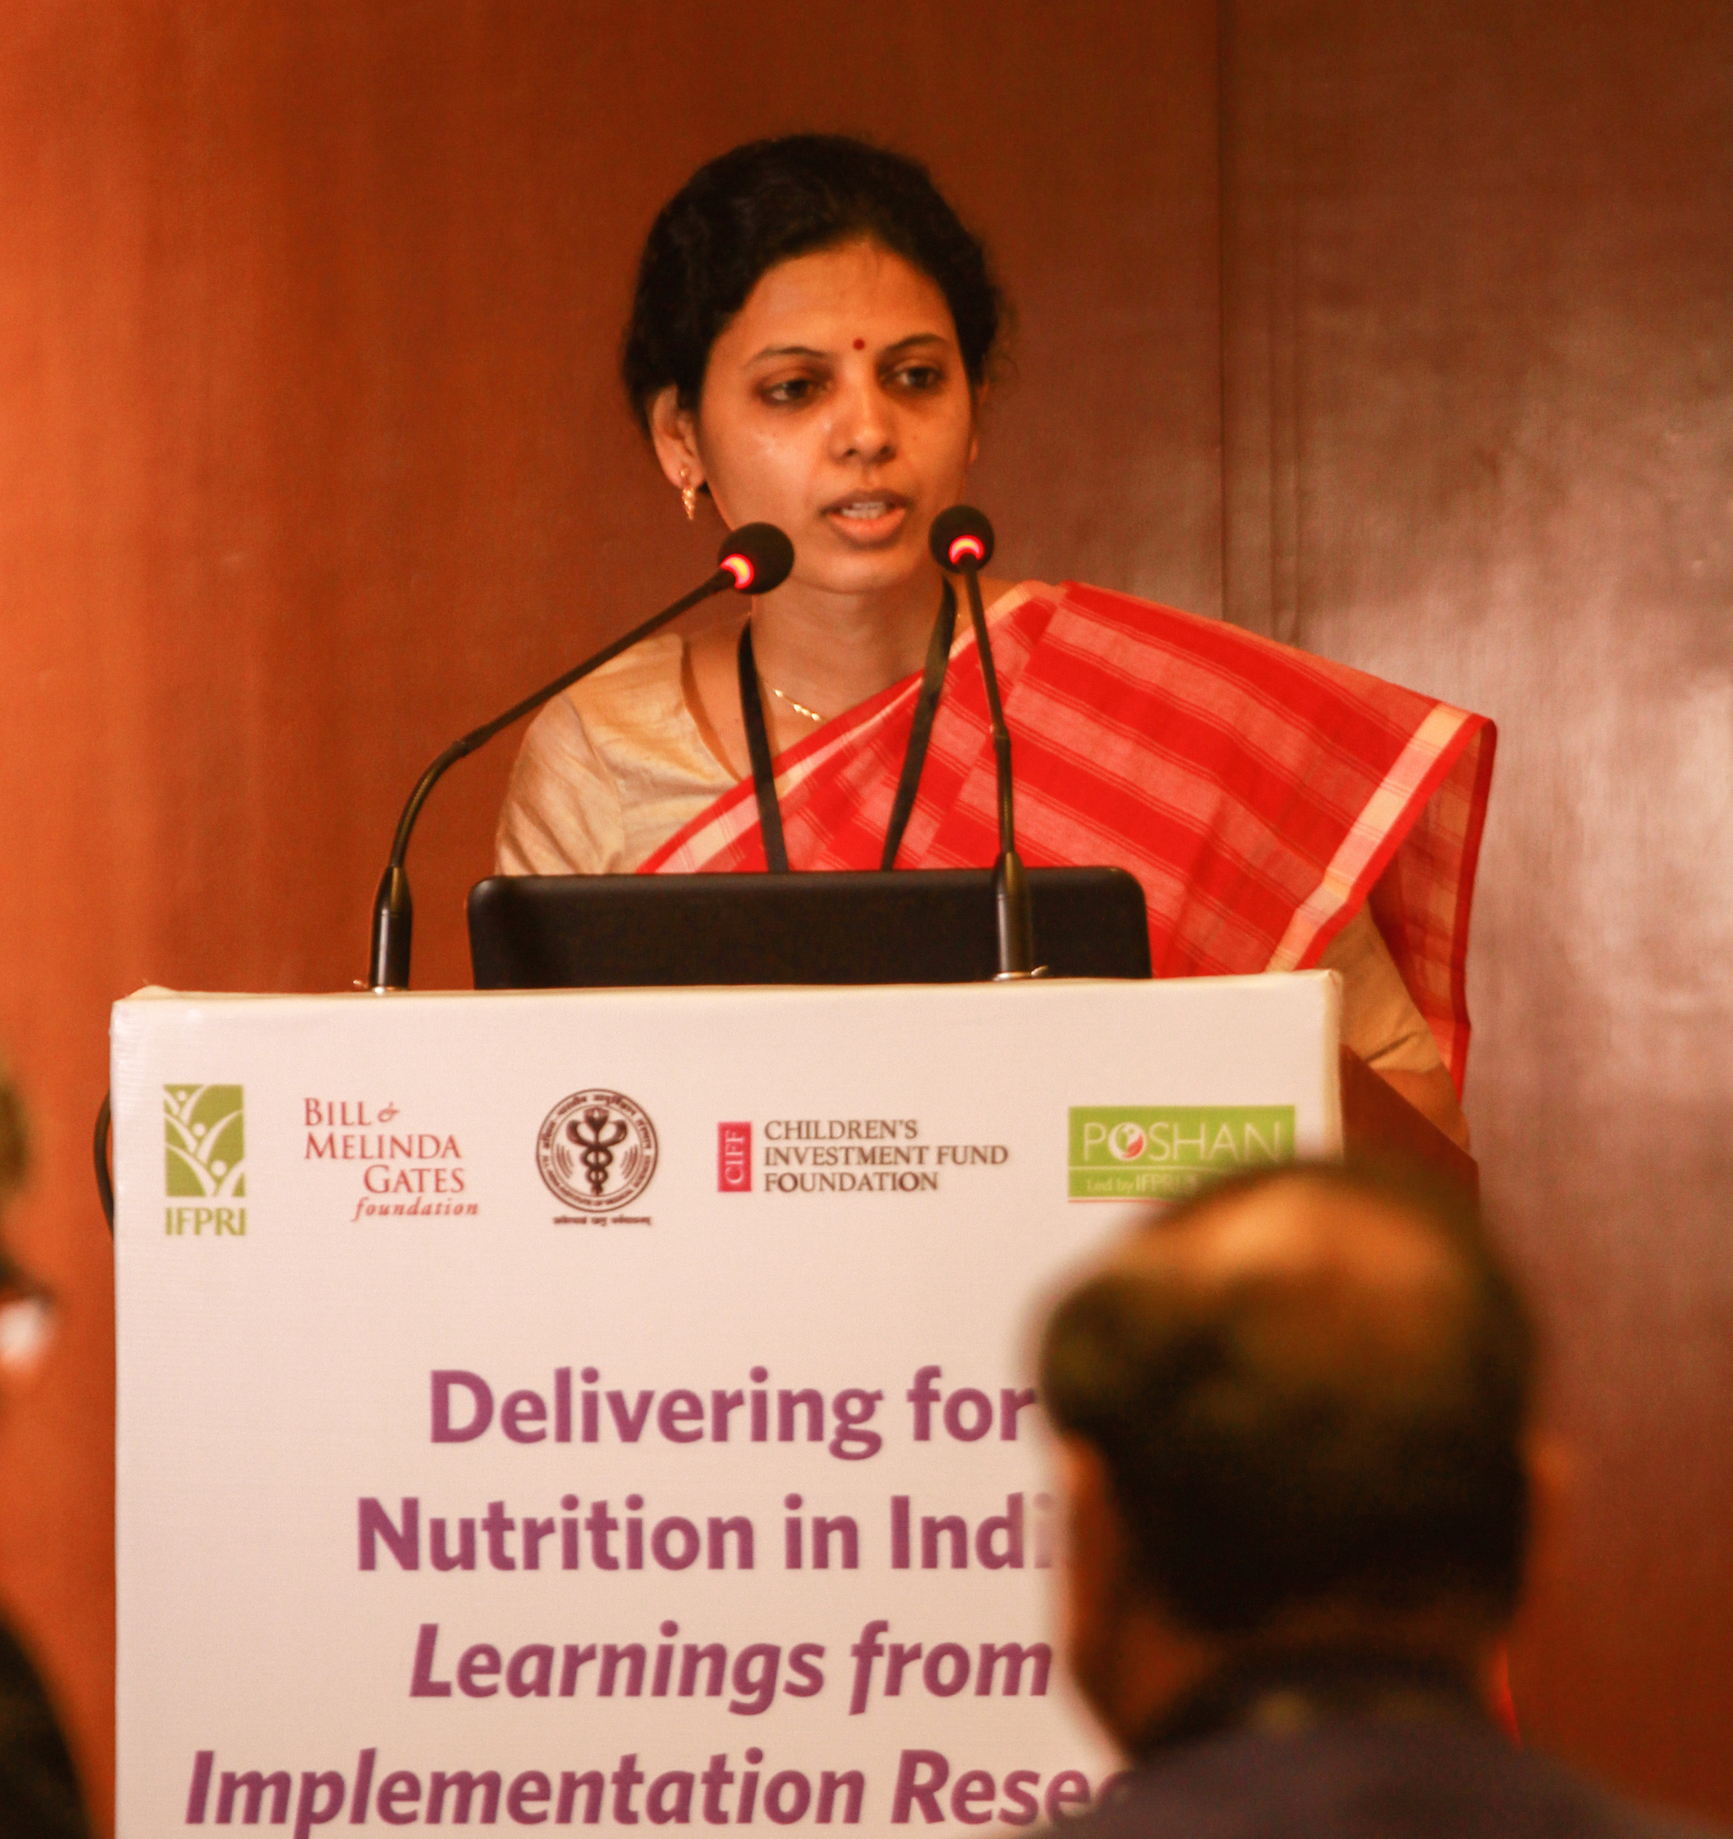 POSHAN Delivering for Nutrition 2016: Session Summary on Measuring Coverage